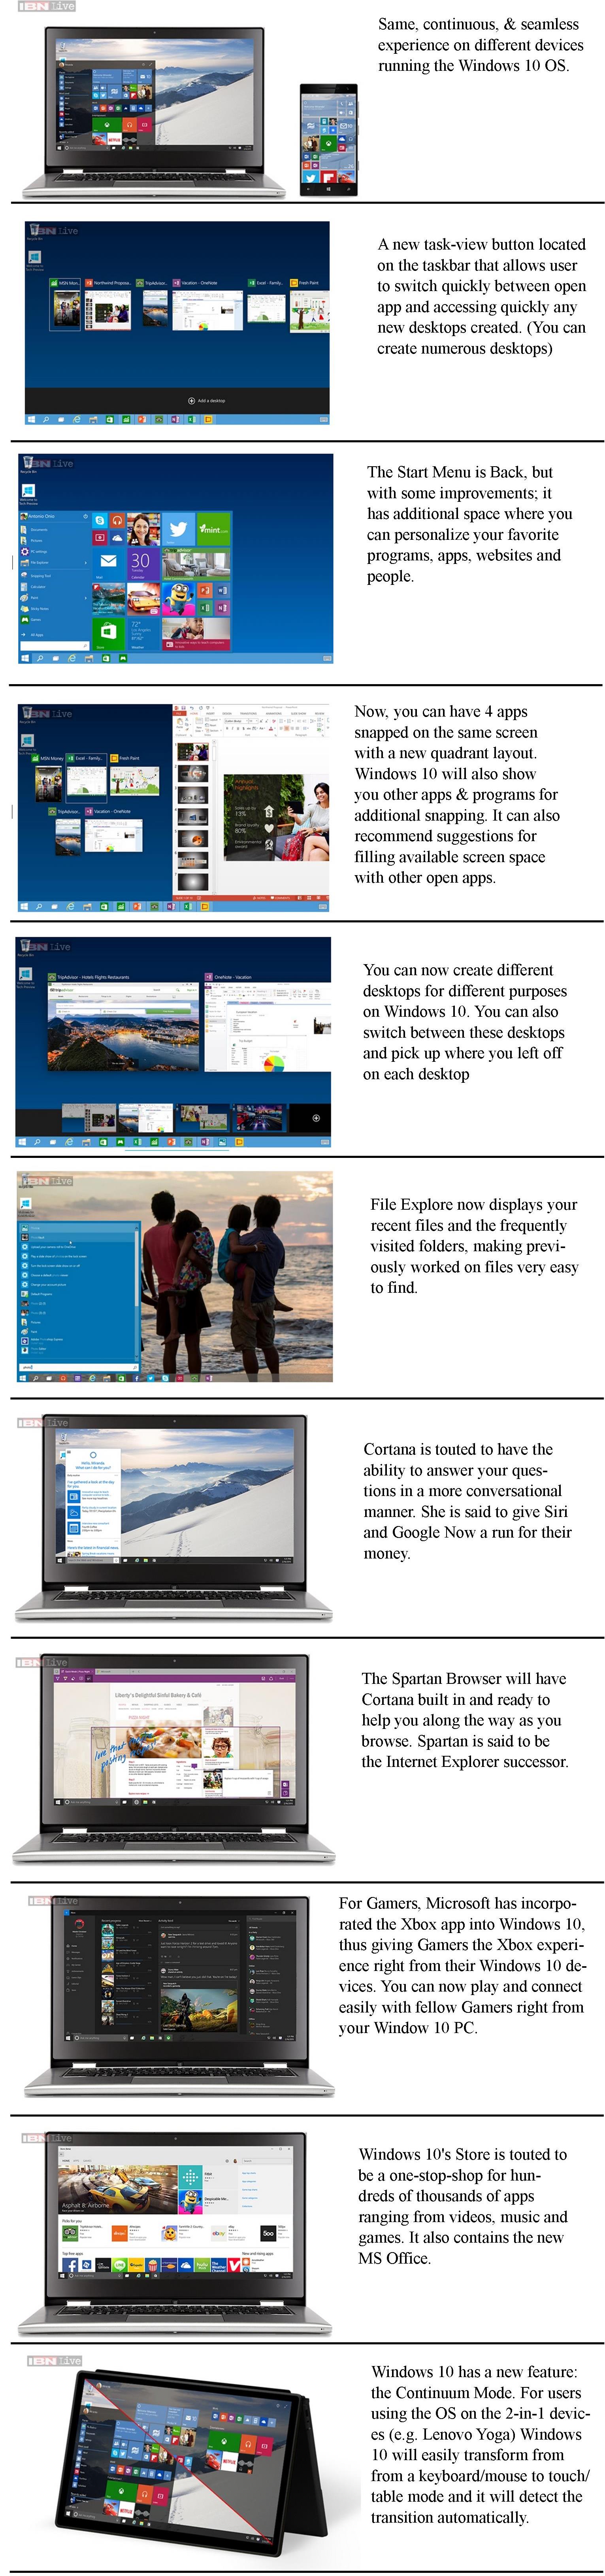 Windows 10: Set To Move Windows From Being ‘Needed’ To Being ‘Chosen And Loved.’